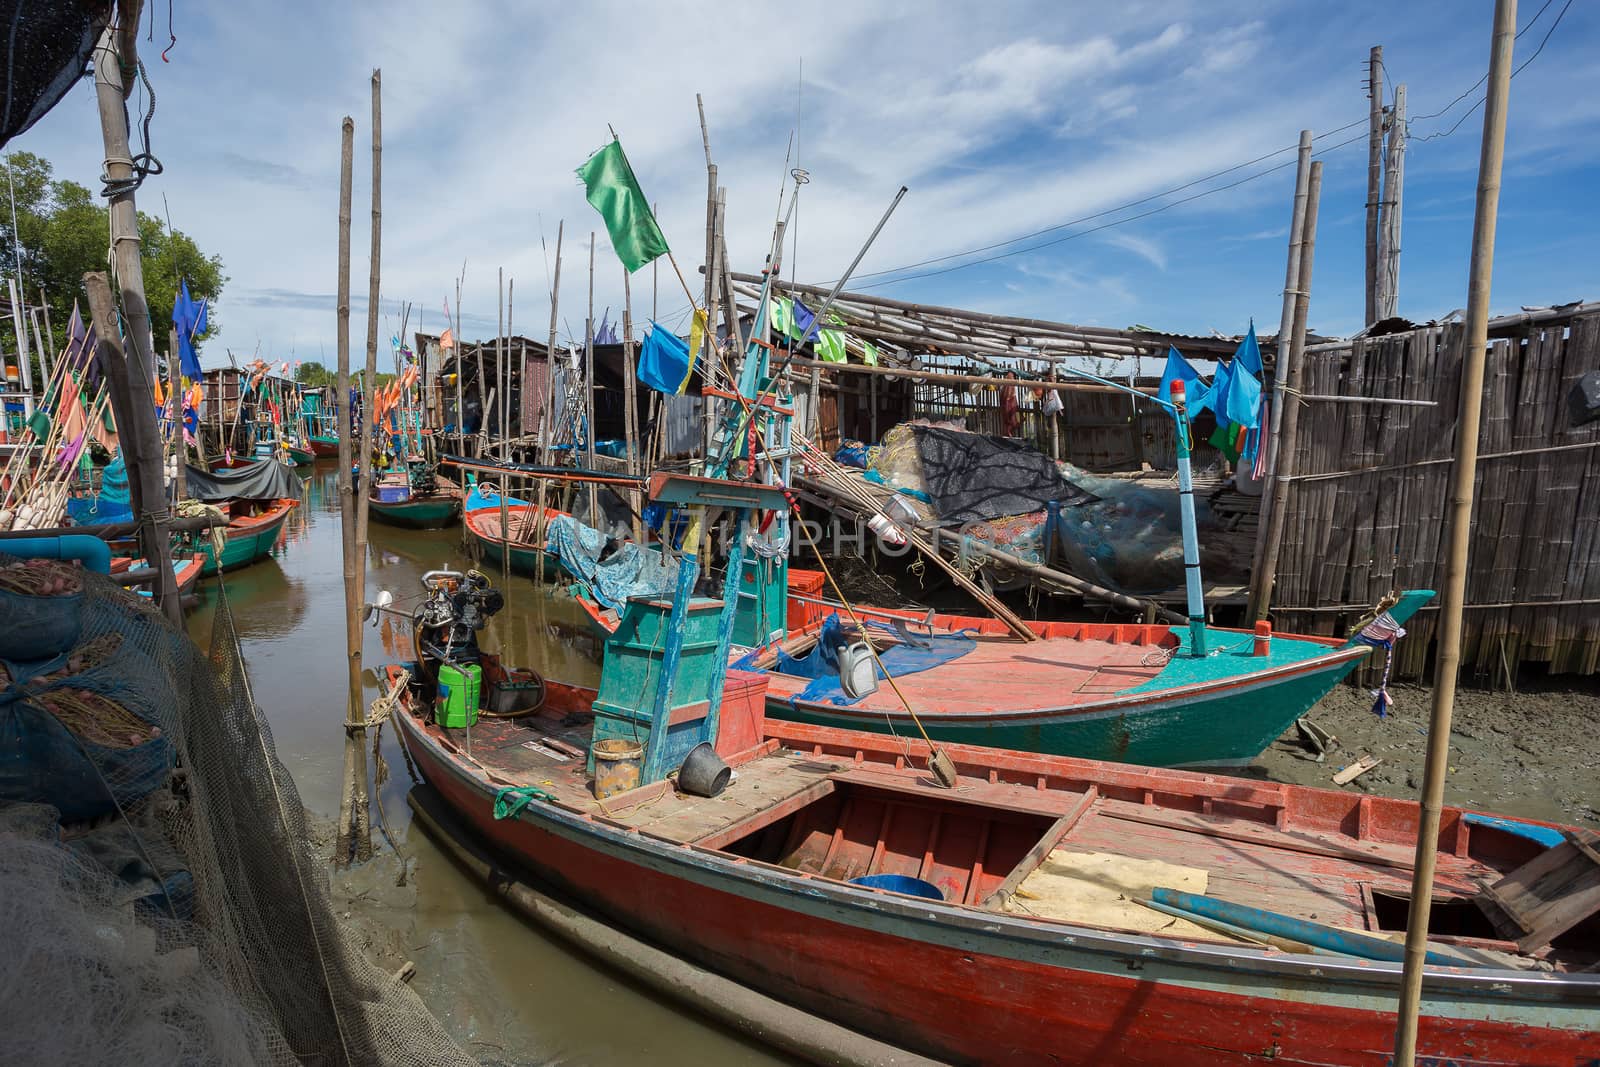 Thai small fishing boats have docked at fishing village at day t by kaiskynet